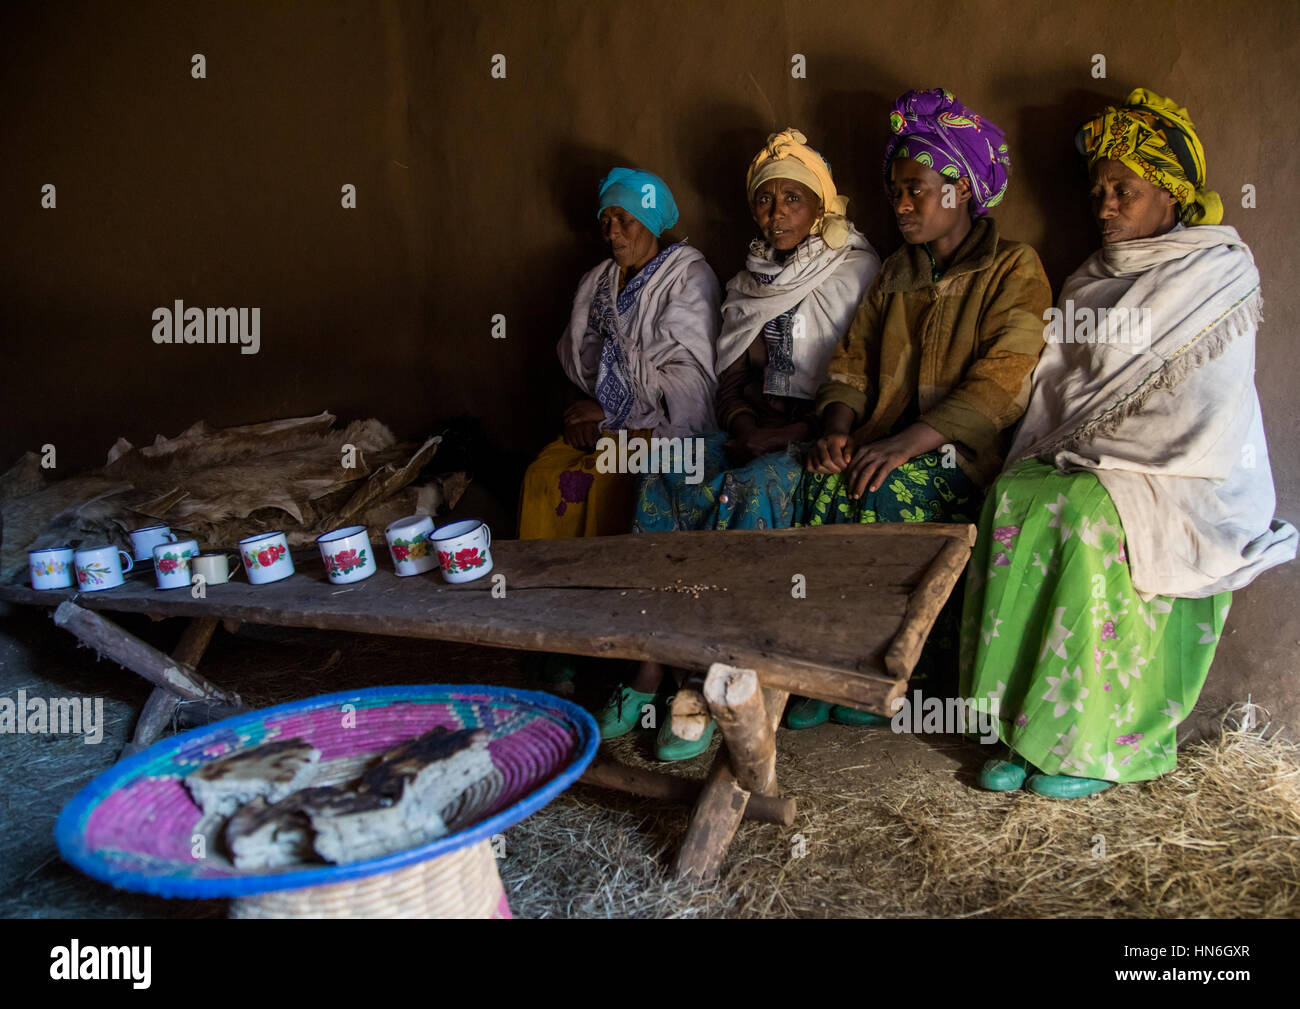 Ethiopian women from the highlands in a house to share a drink and eat bread, Amhara region, Debre Birhan, Ethiopia Stock Photo